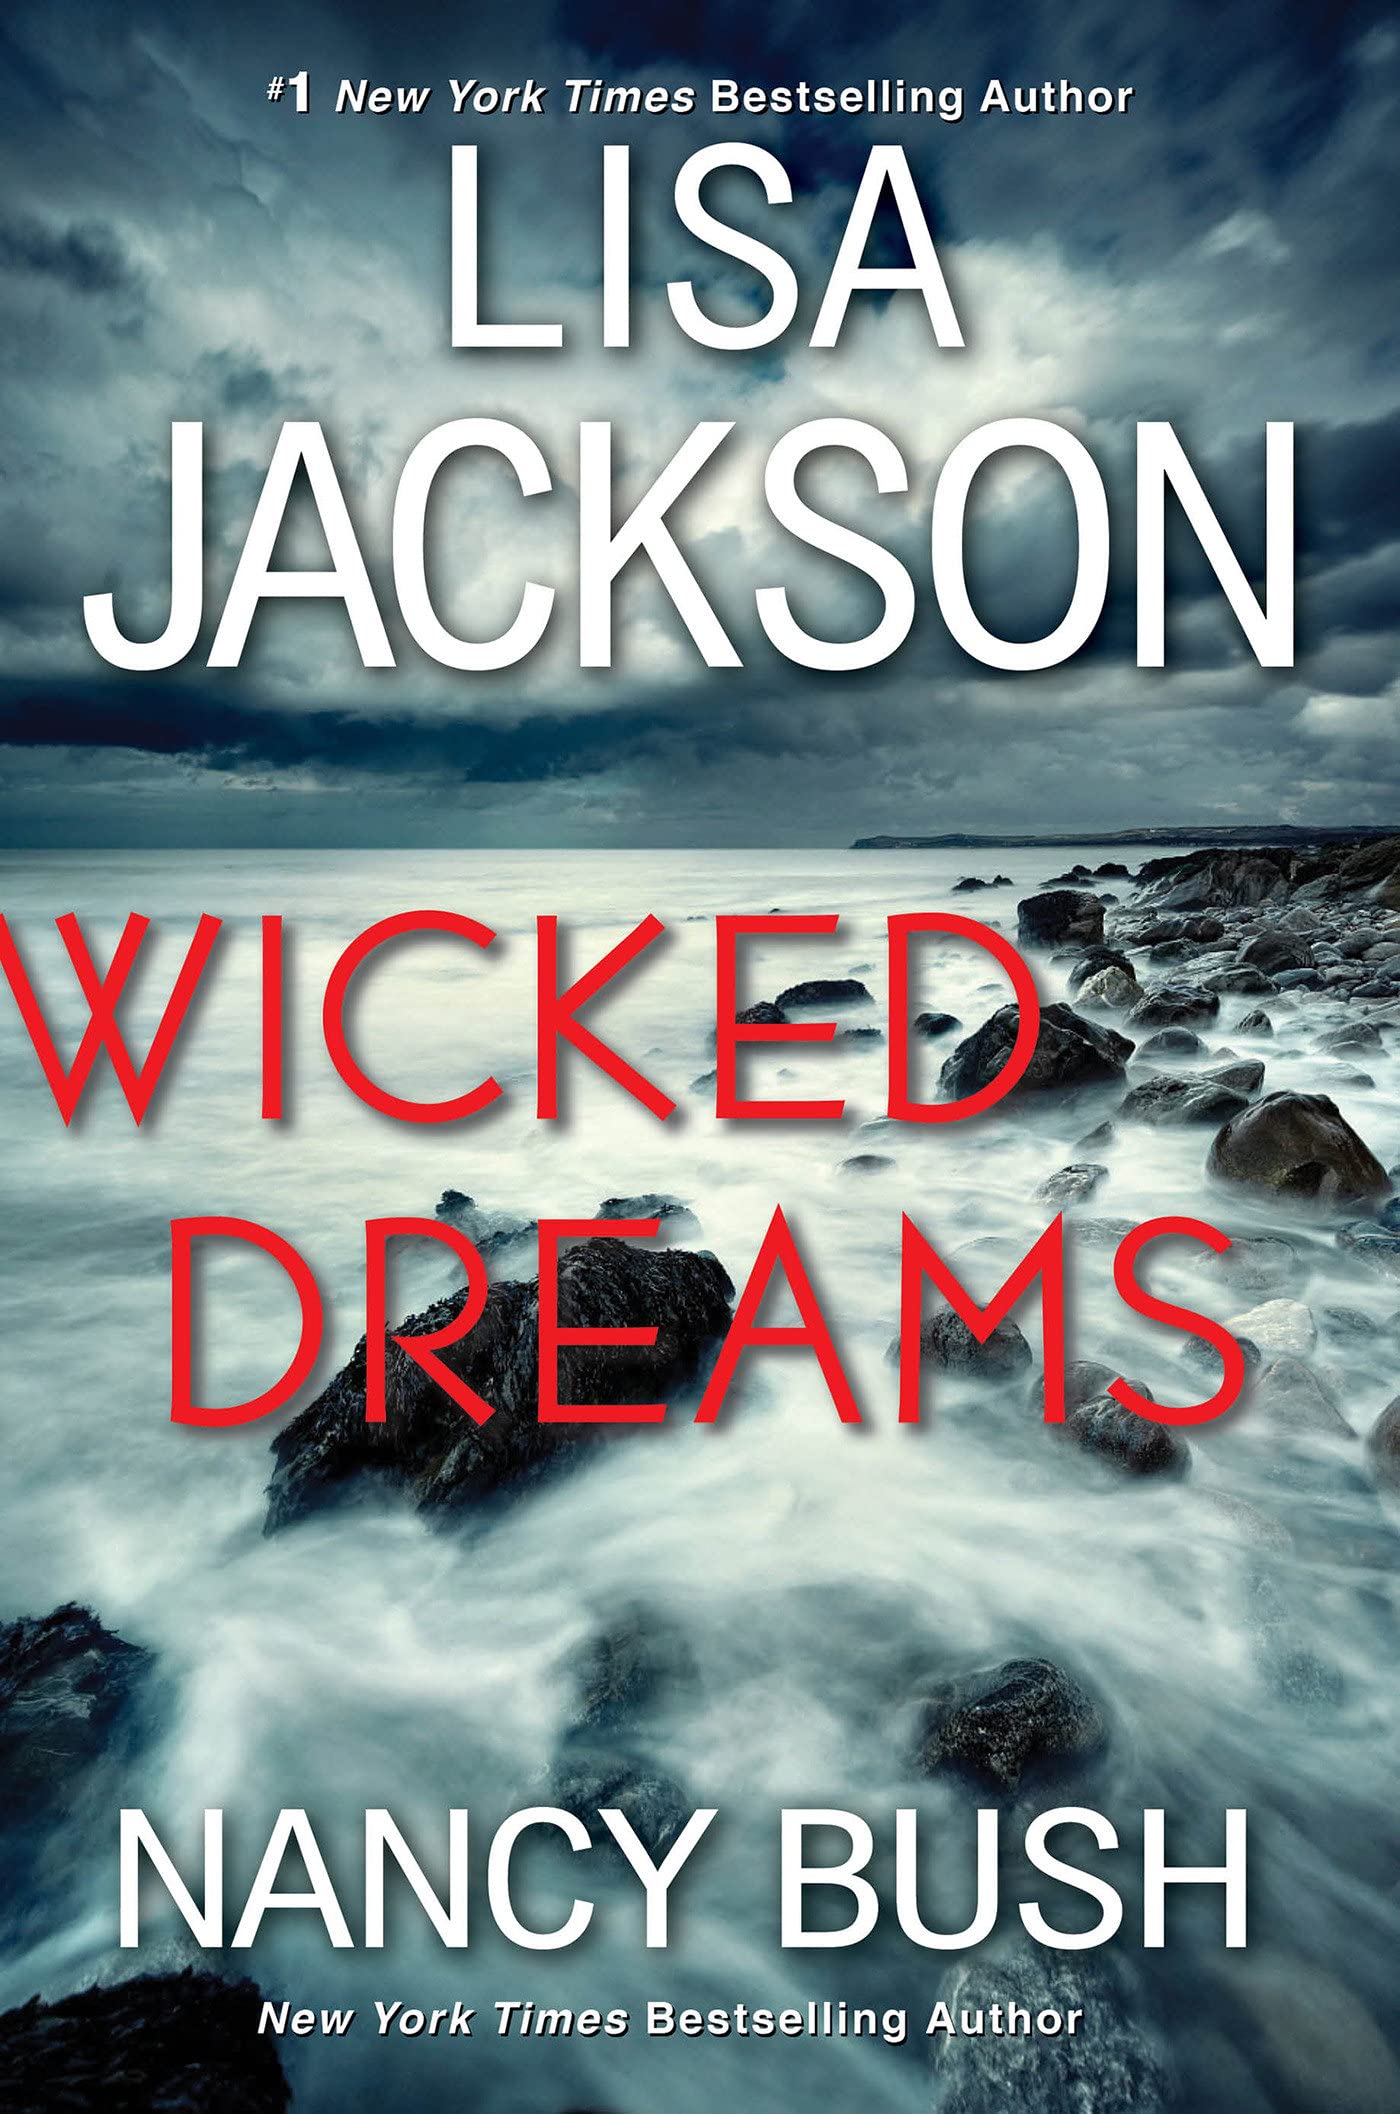 Image for "Wicked Dreams"